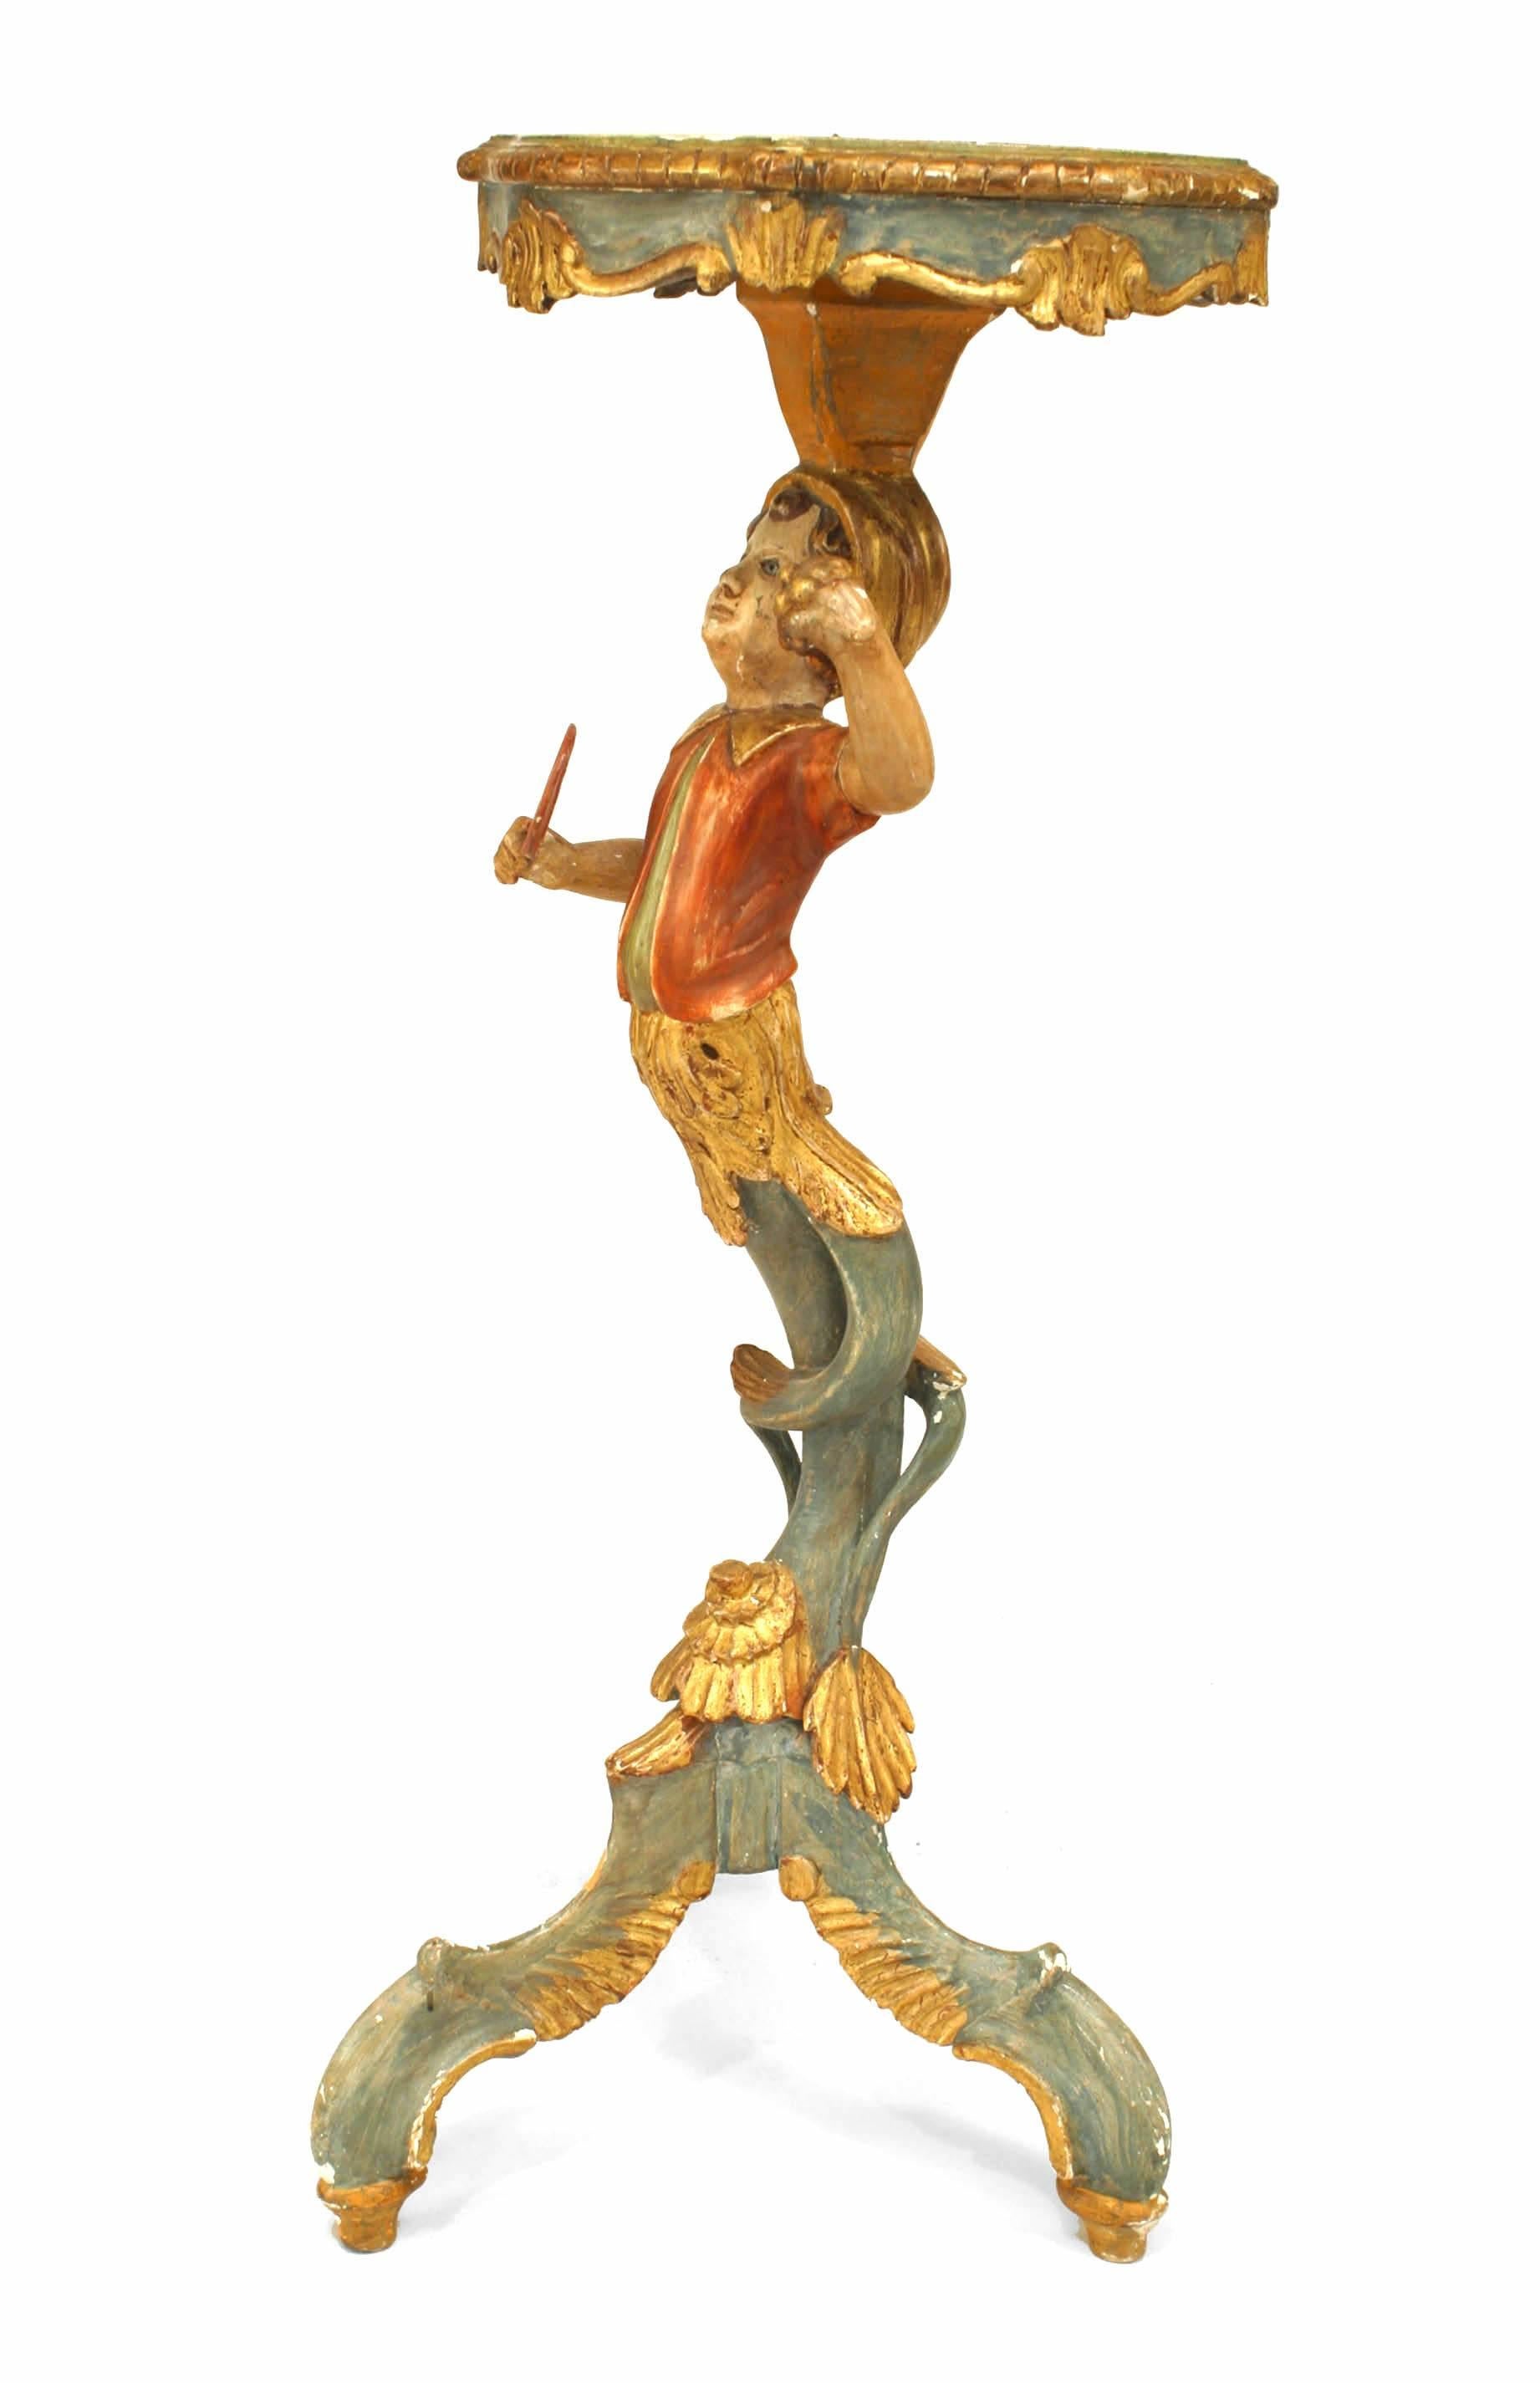 Italian Venetian style (19/20th Cent) polychromed pedestal stand with a figure of a young boy holding a fan and grapes.
